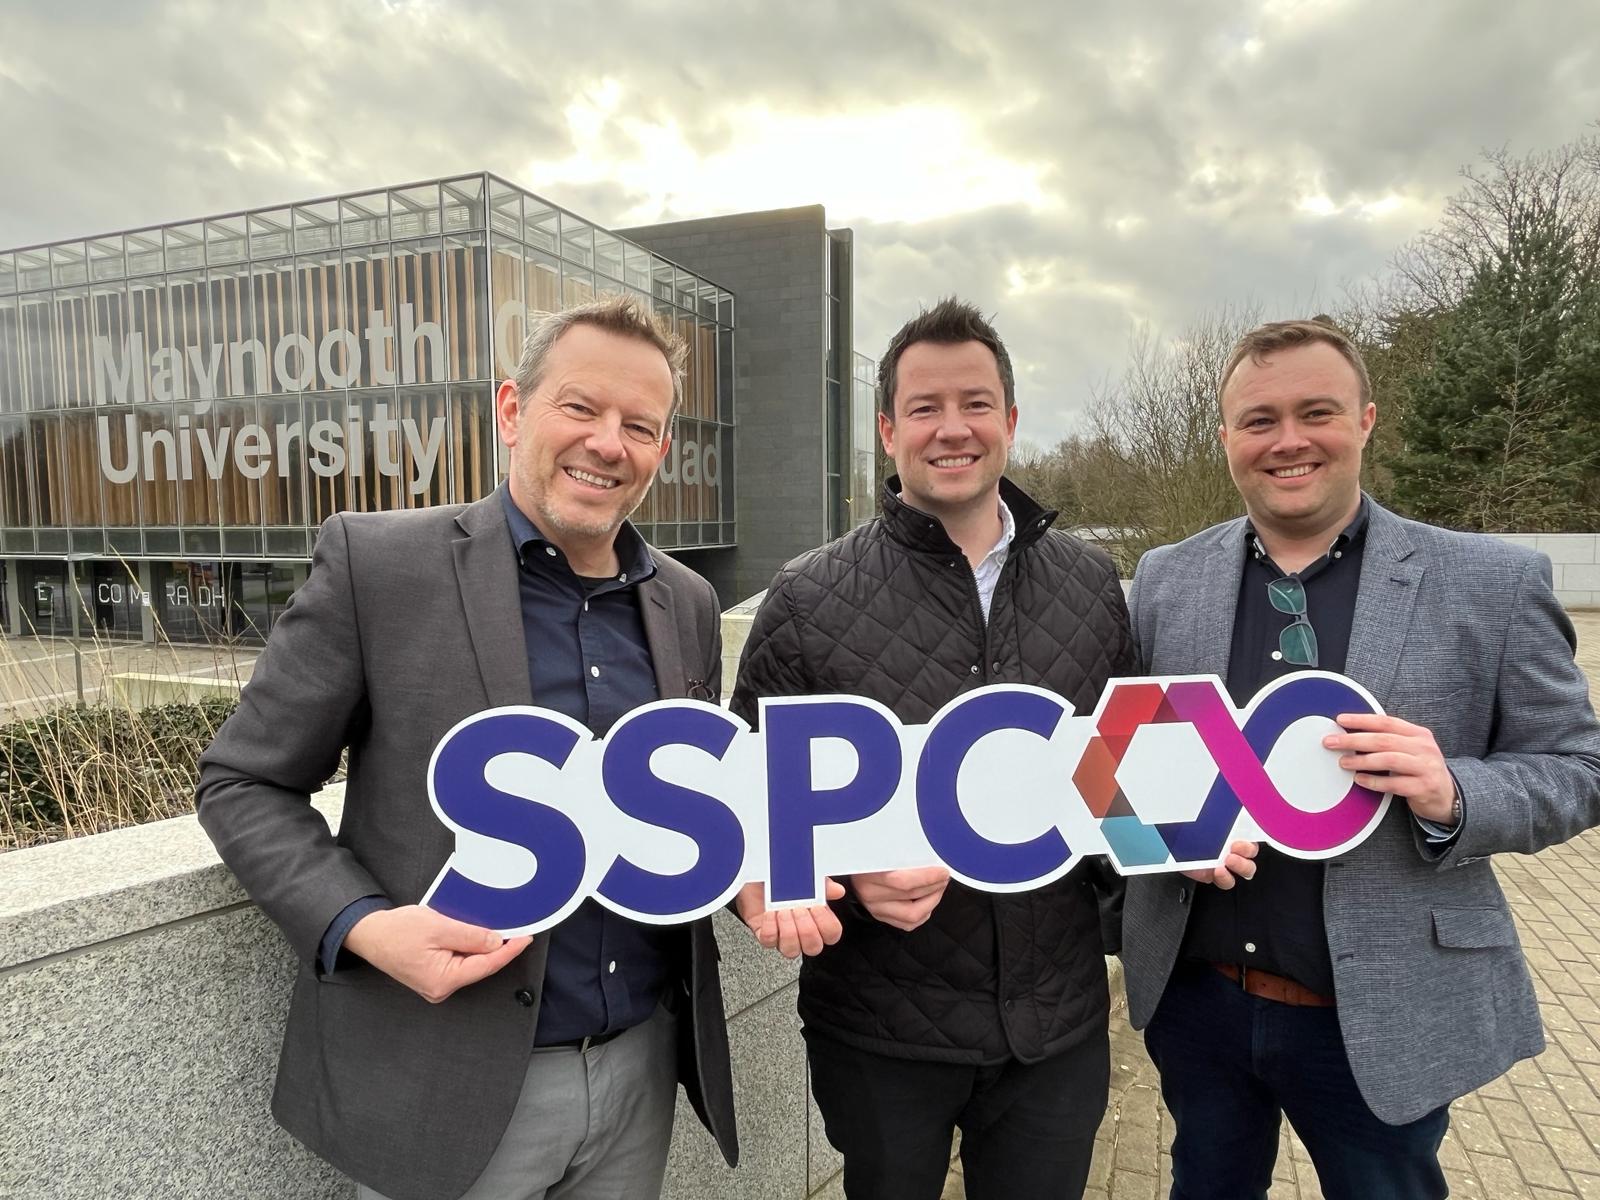 SSPC-Axelyf biotech collaboration launched to find drug delivery breakthroughs